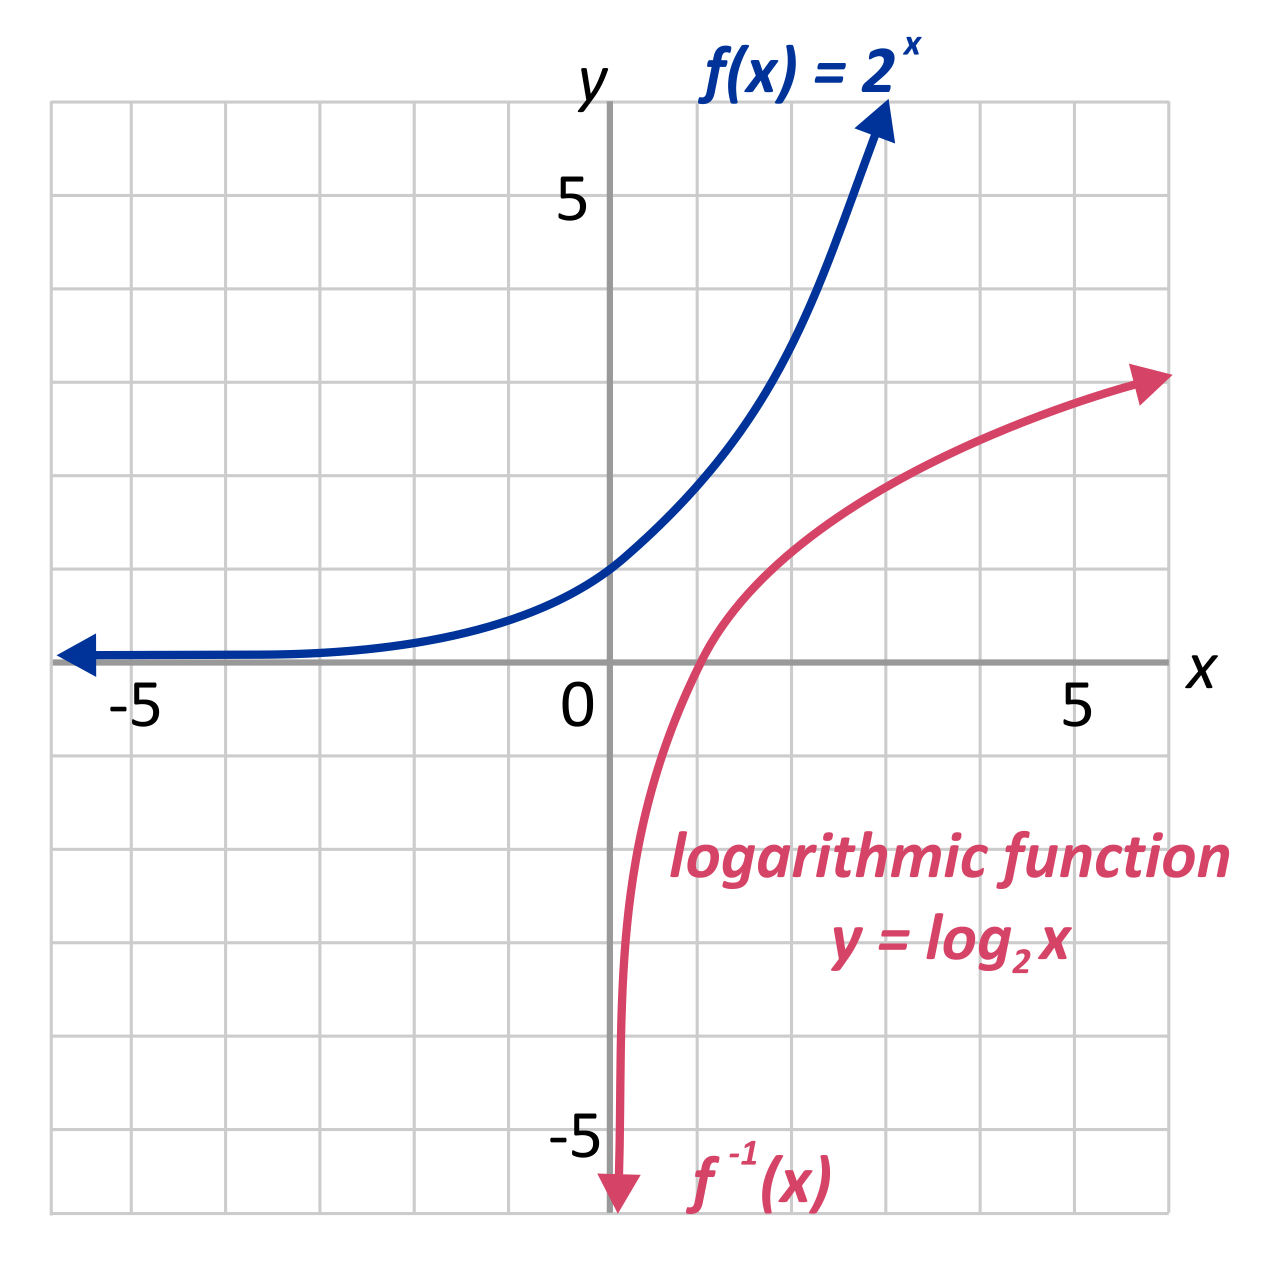 An exponential and logarithmic function graphed on a coordinate plane